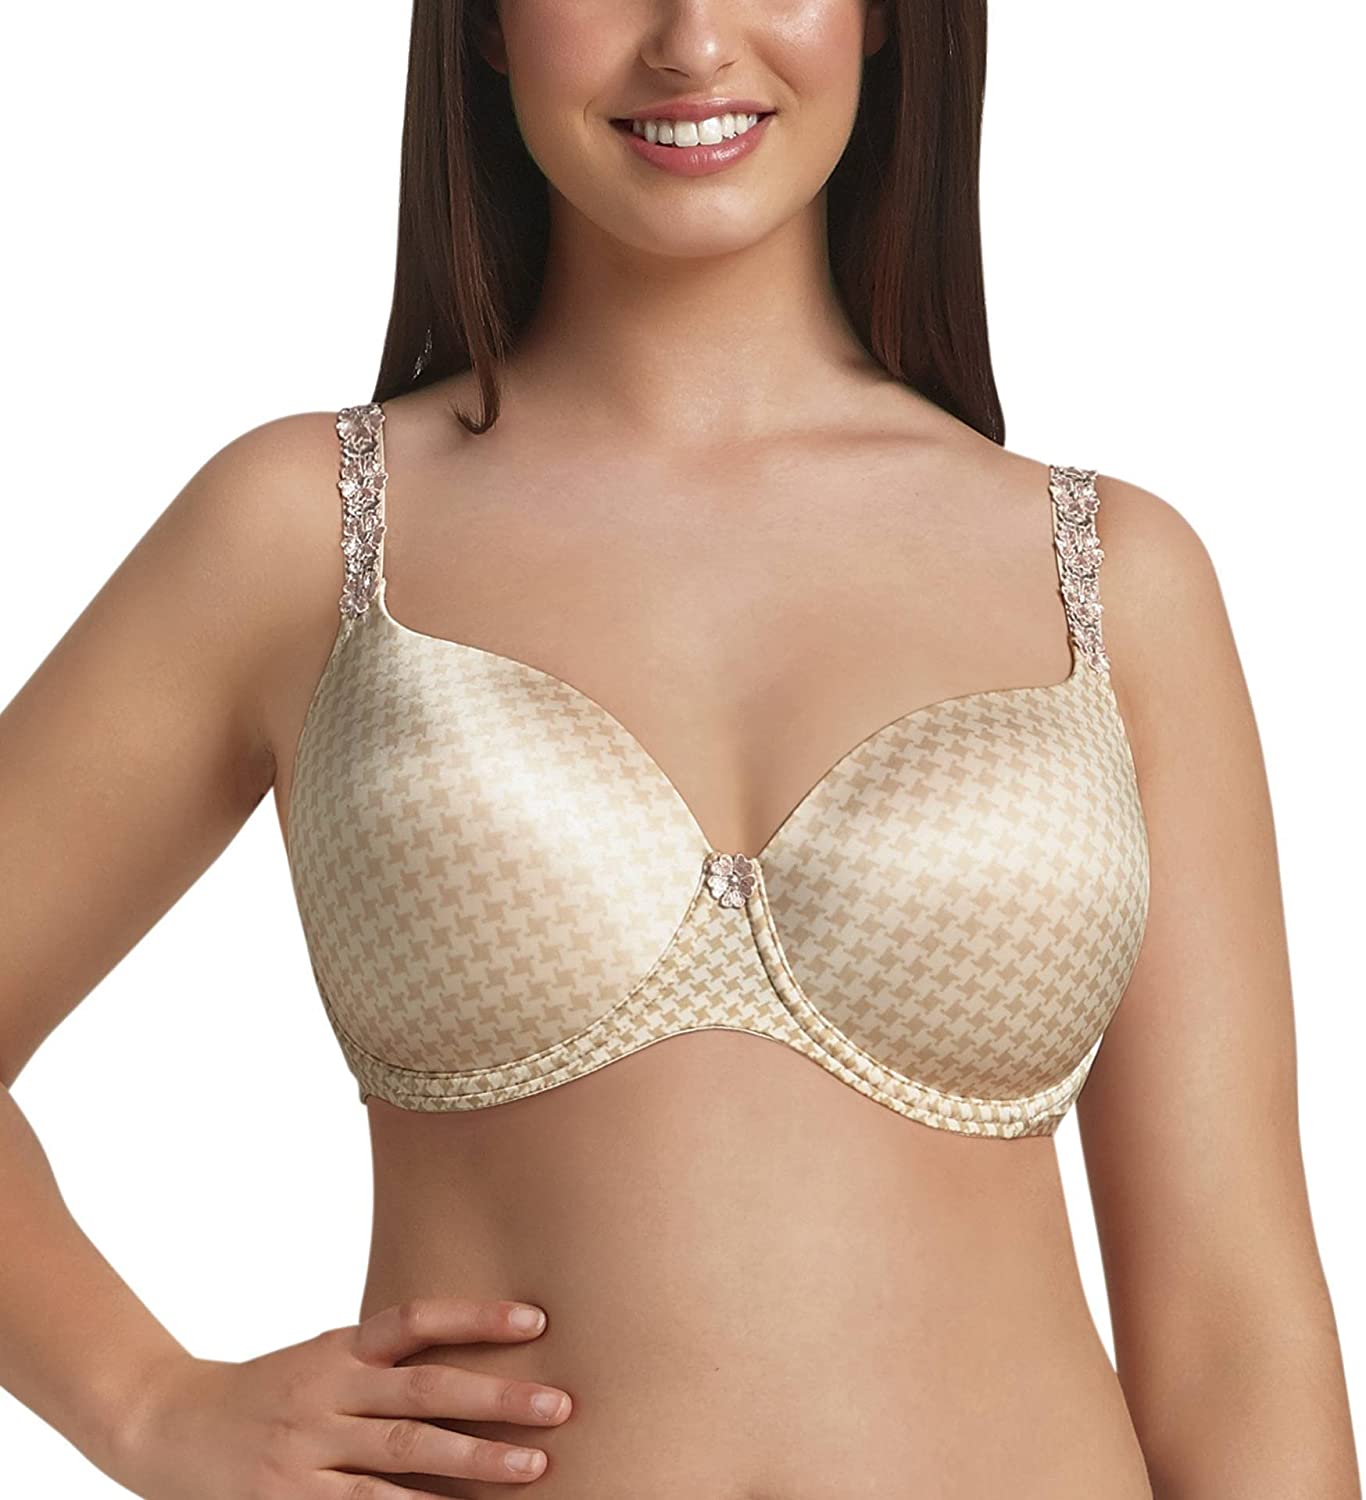 RosaFaia Josephine Womens Padded Contour Underwired Bra, 32G, Pearl Rose